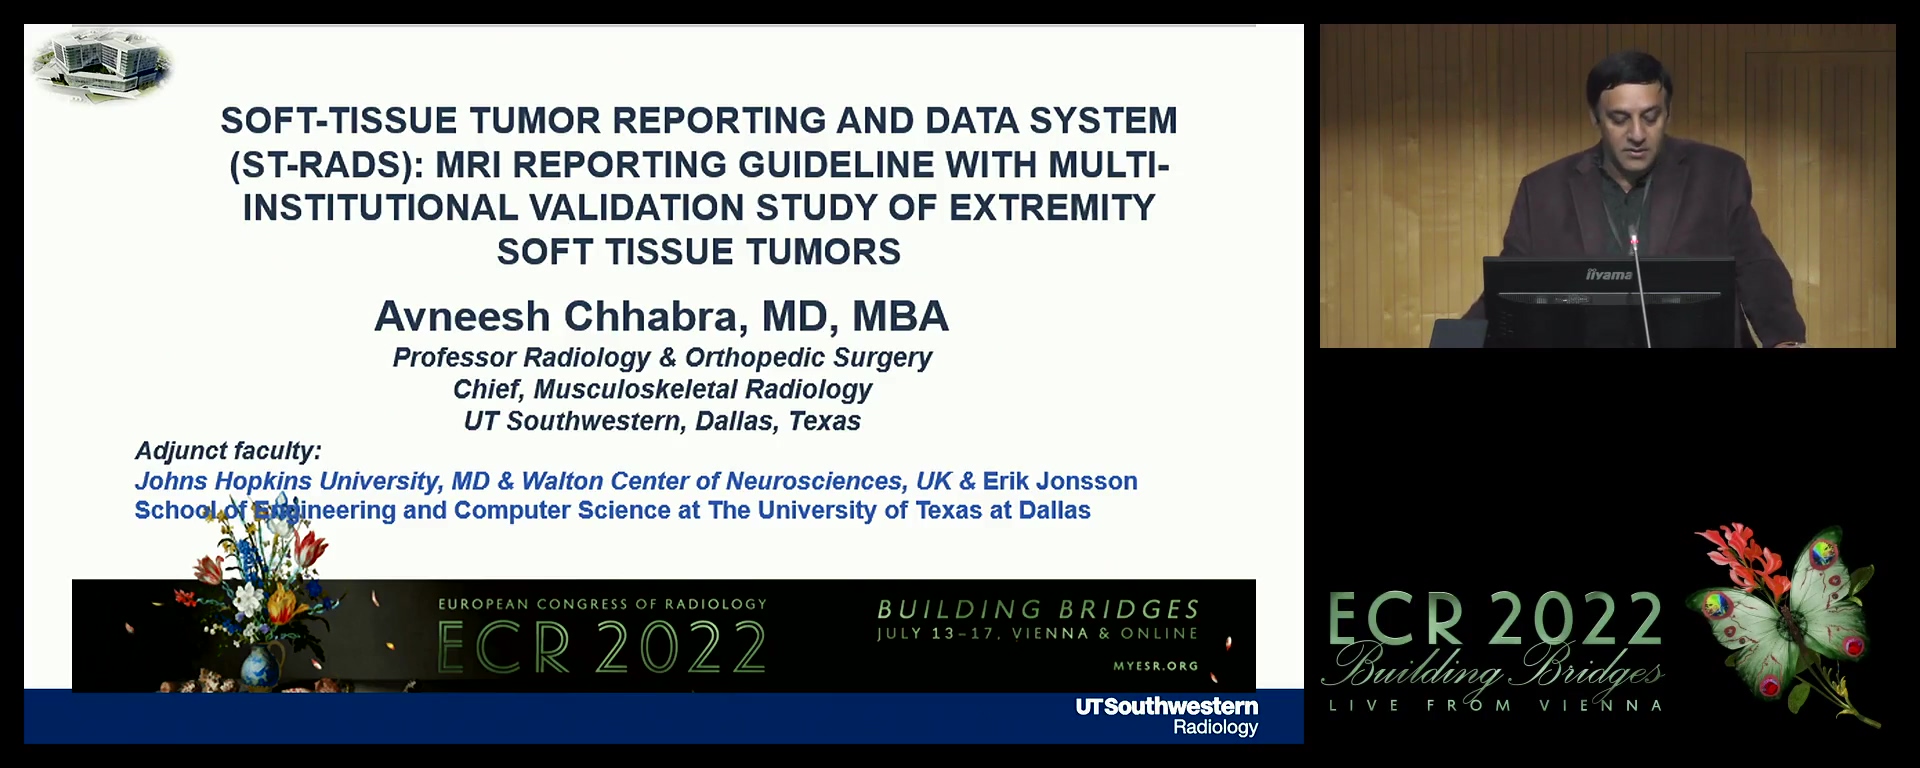 Soft-tissue tumor reporting and data system (ST-RADS): MRI reporting guidelines with multi-institutional validation study of extremity soft-tissue tumours